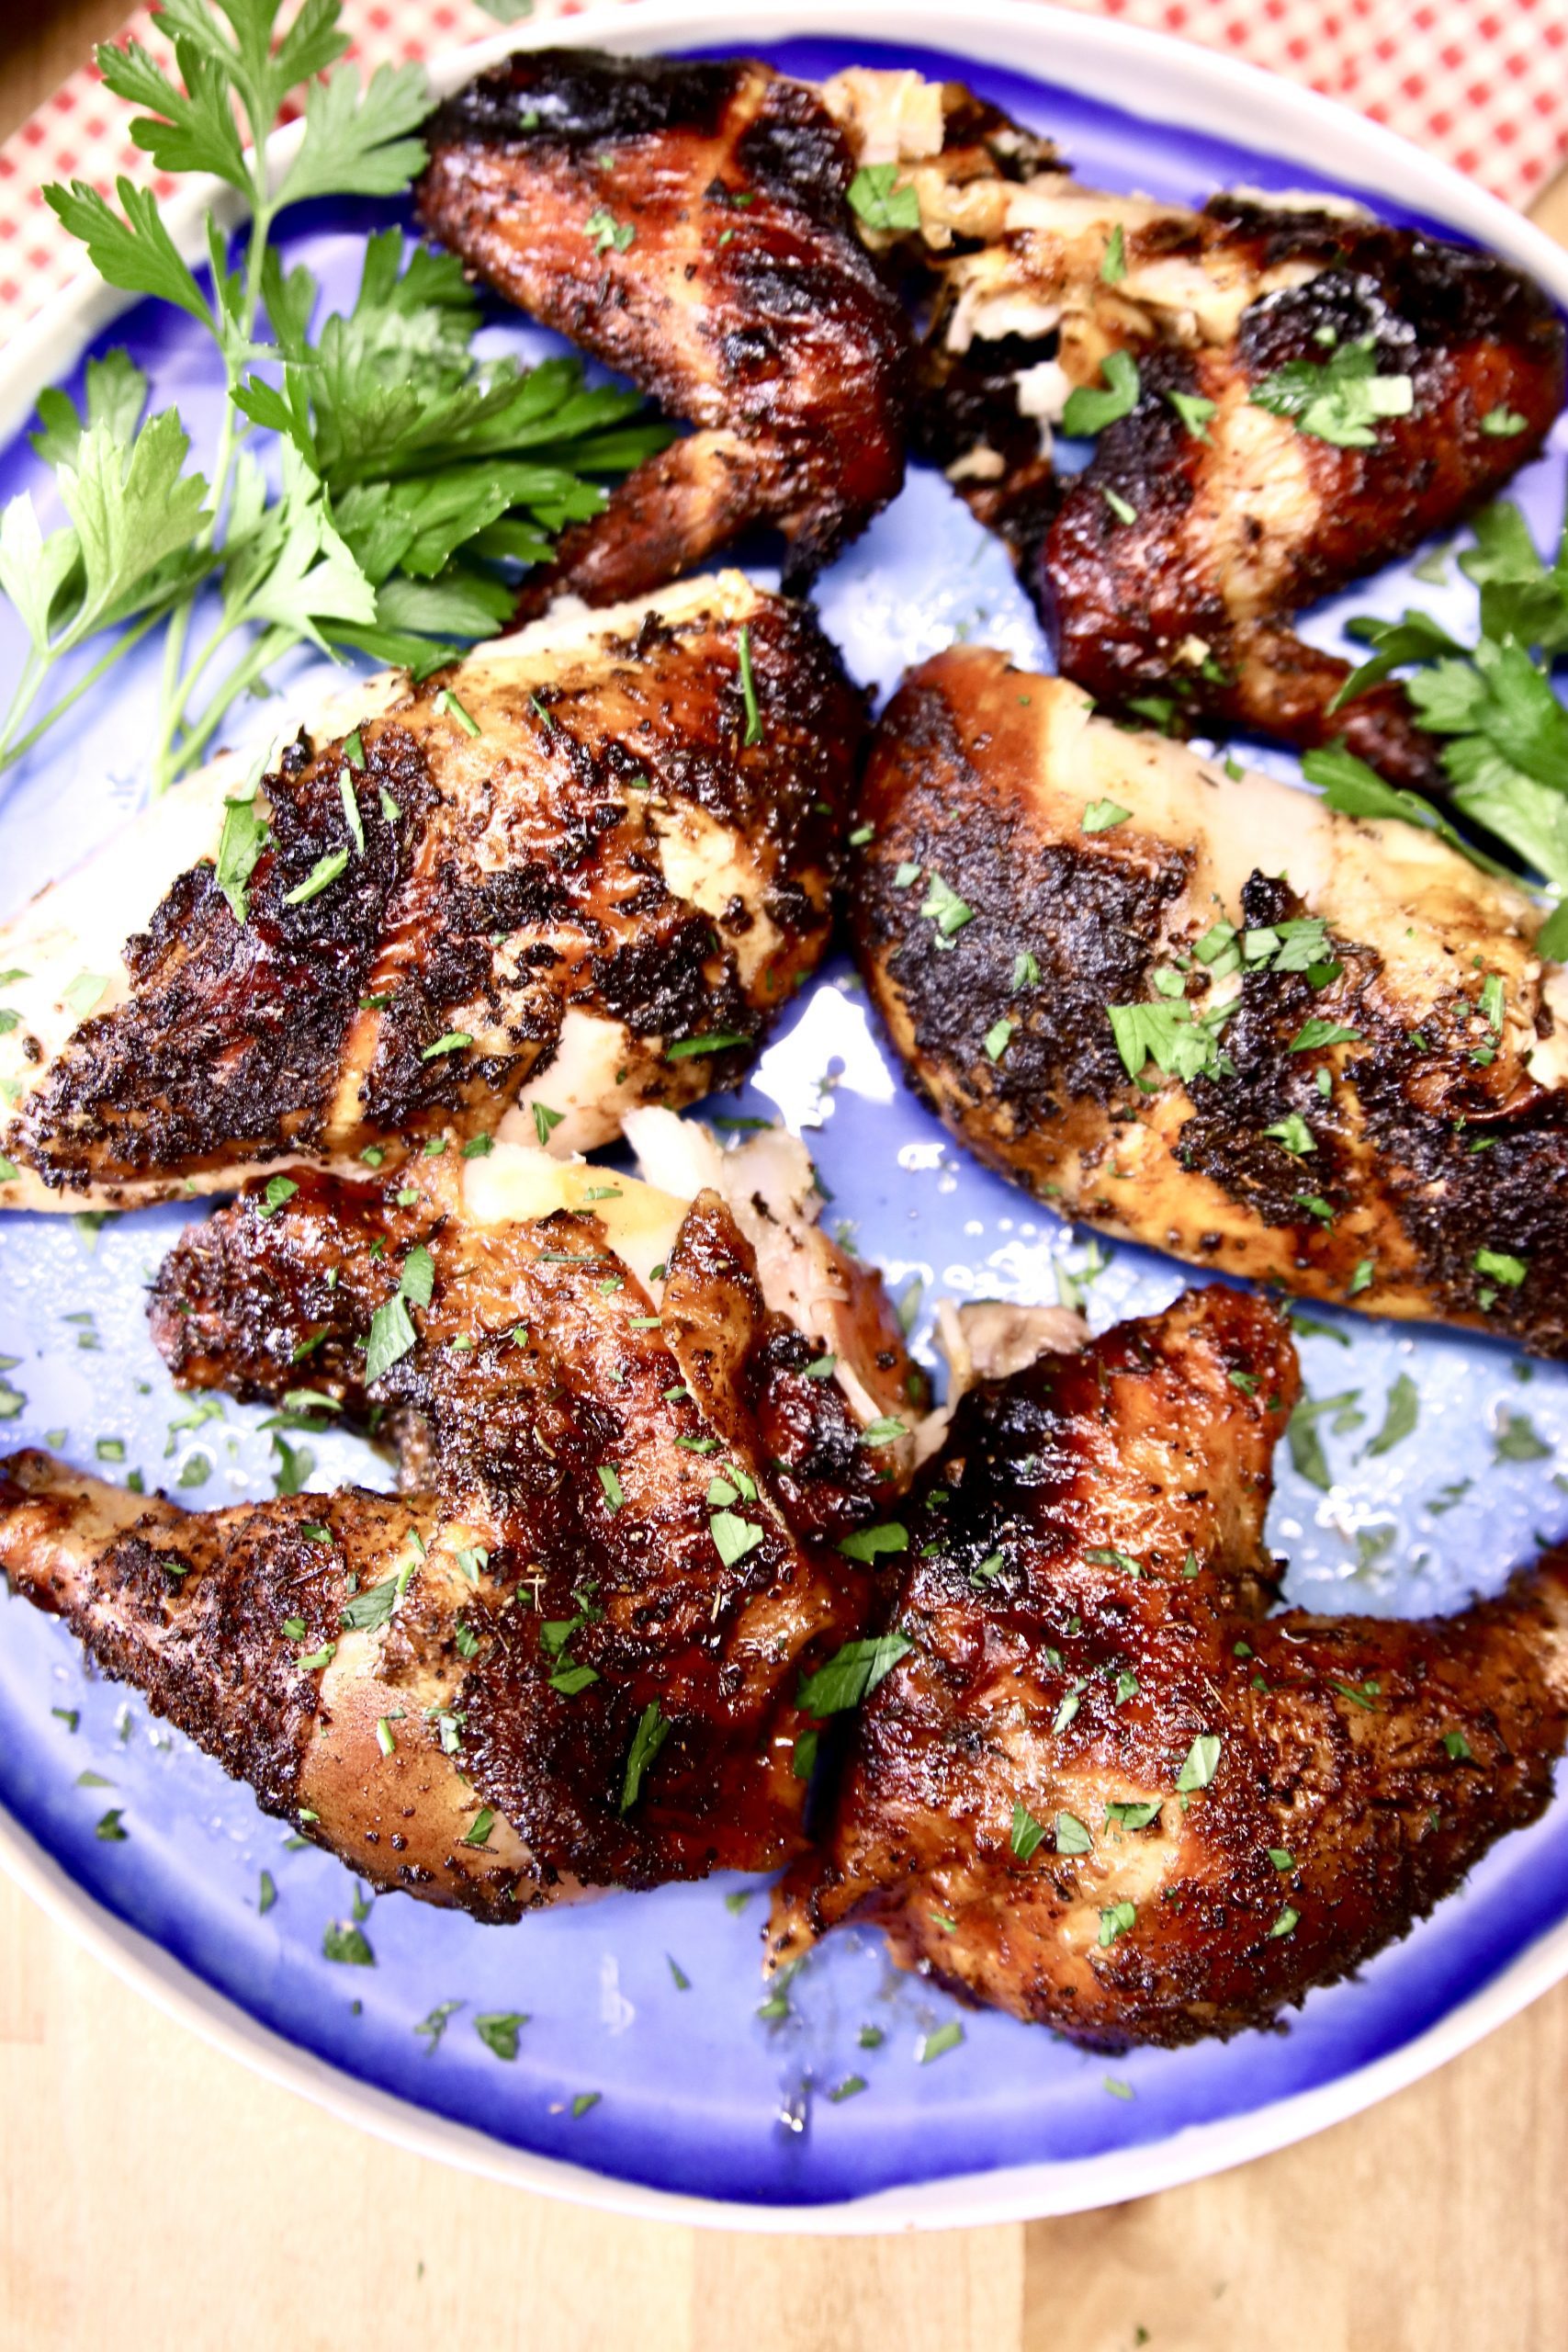 cut up grilled chicken on a blue plate with parsley garnish